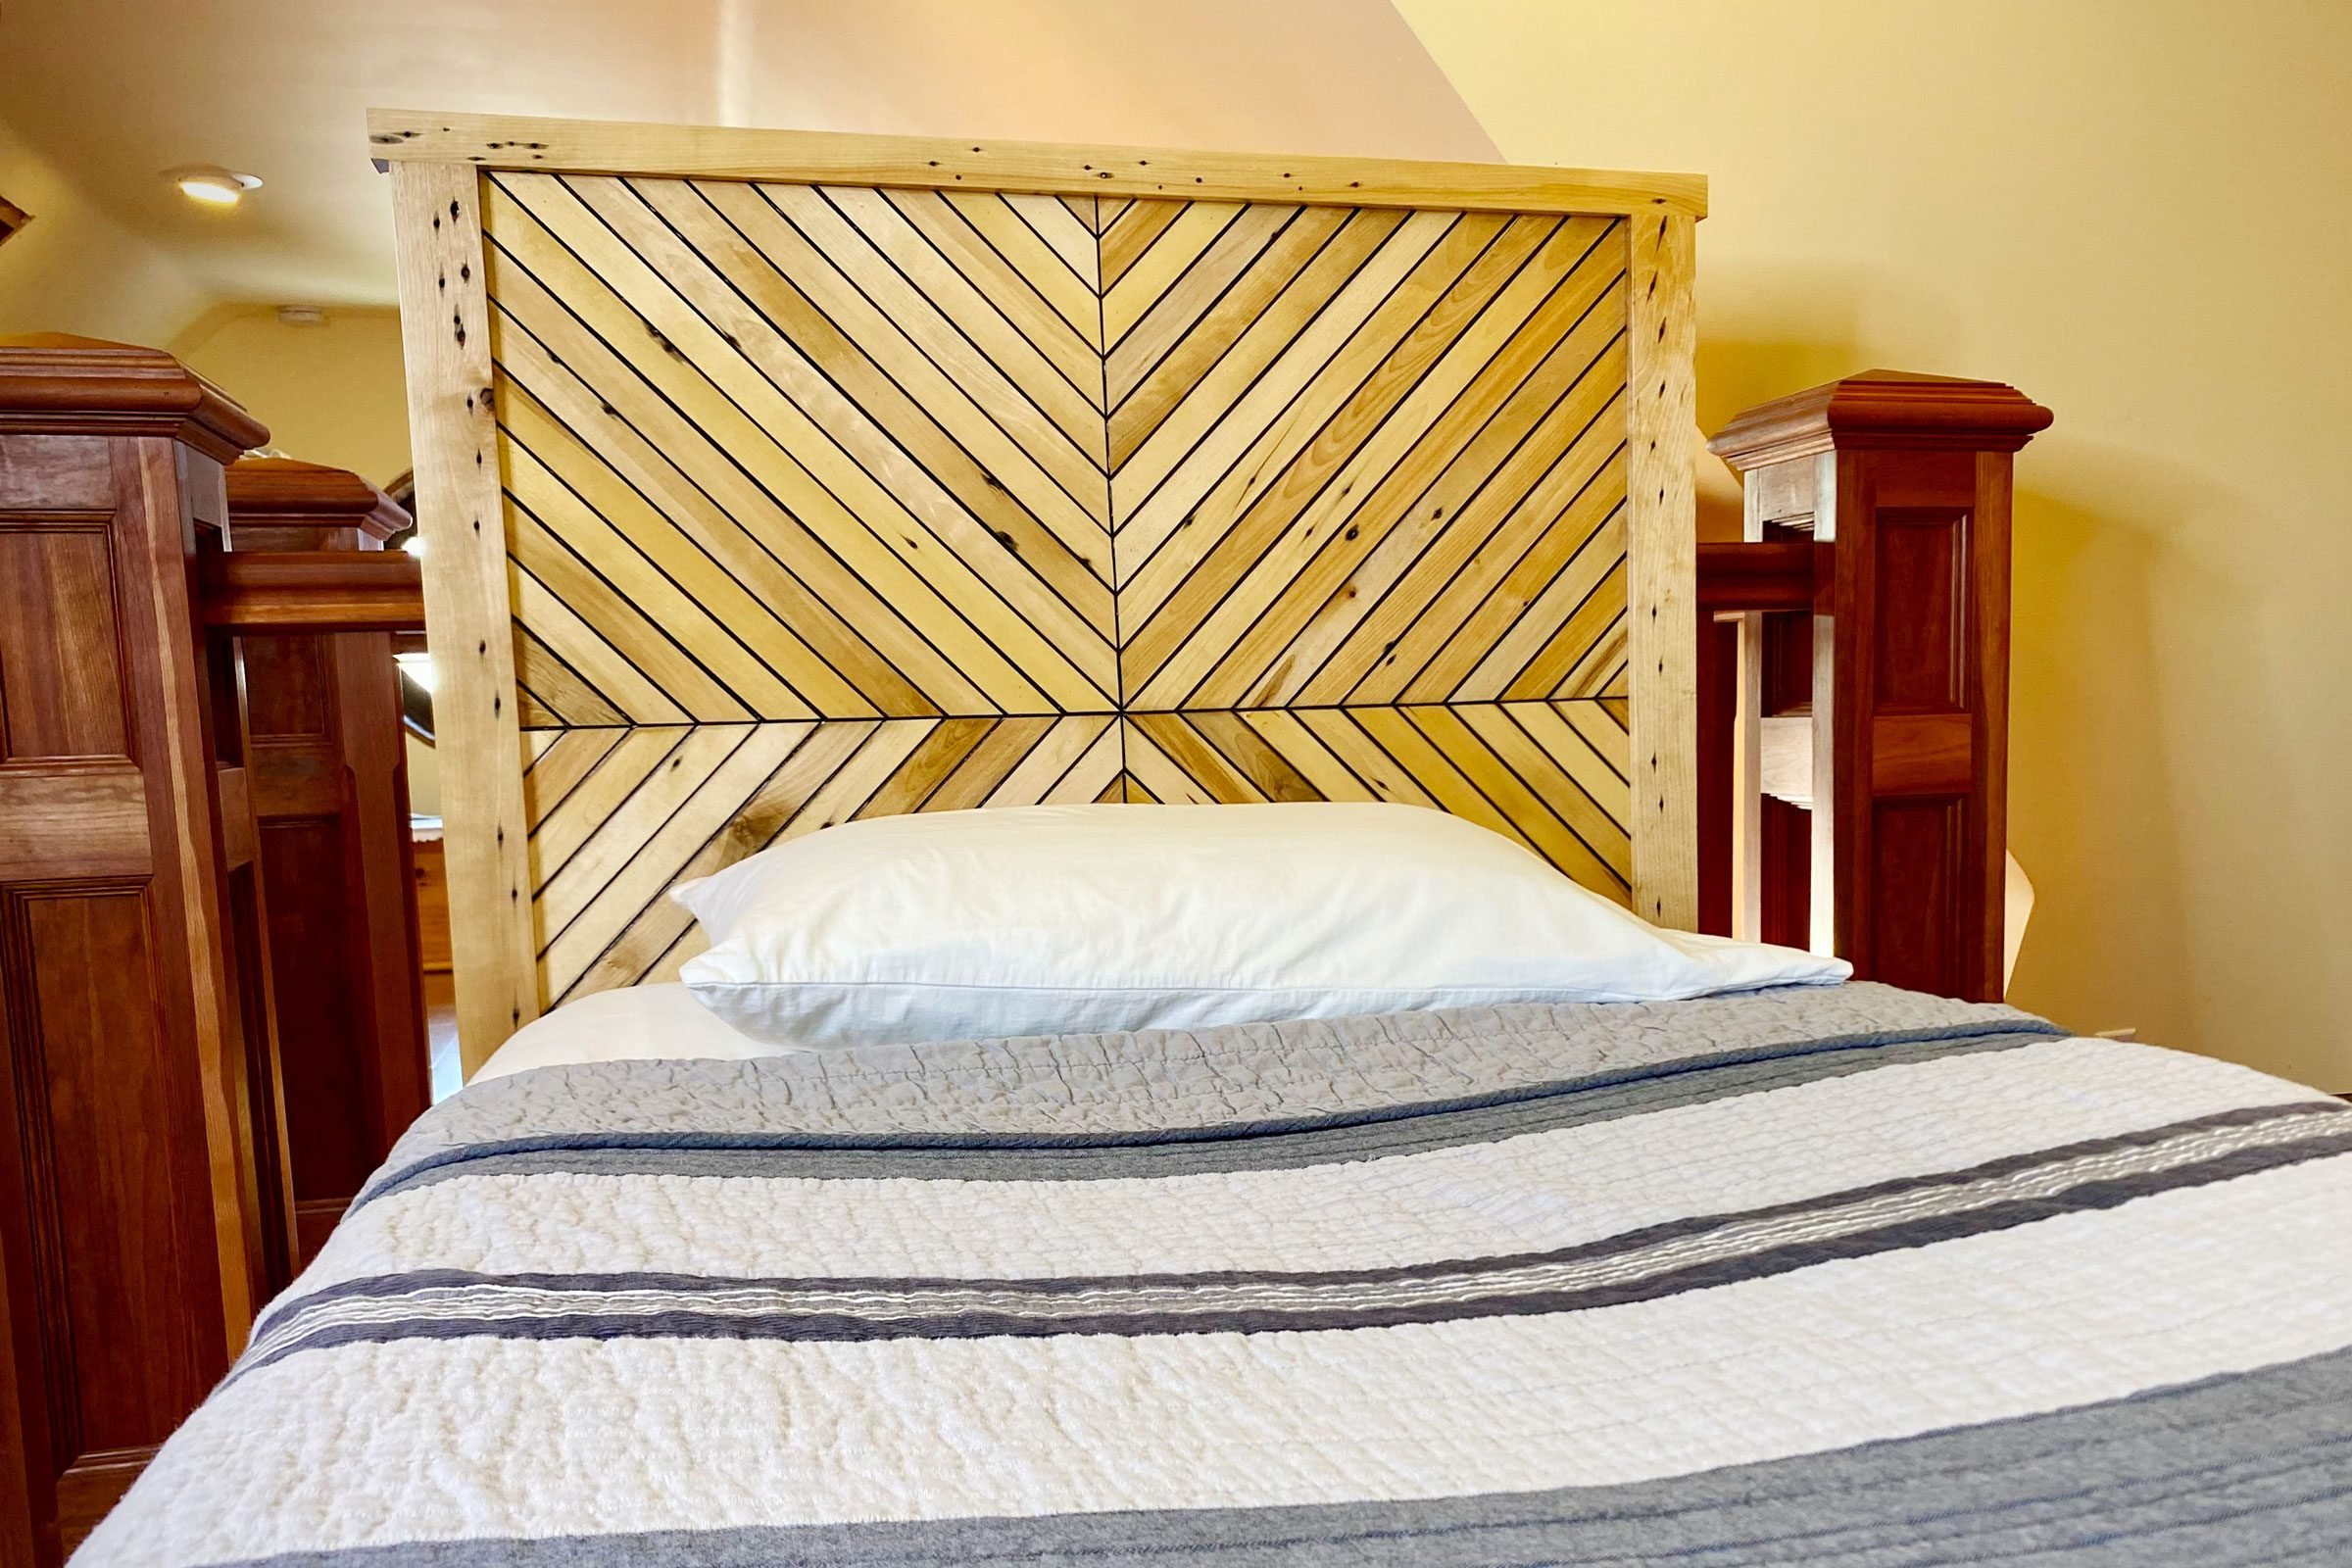 How To Build a Reclaimed Wood Headboard